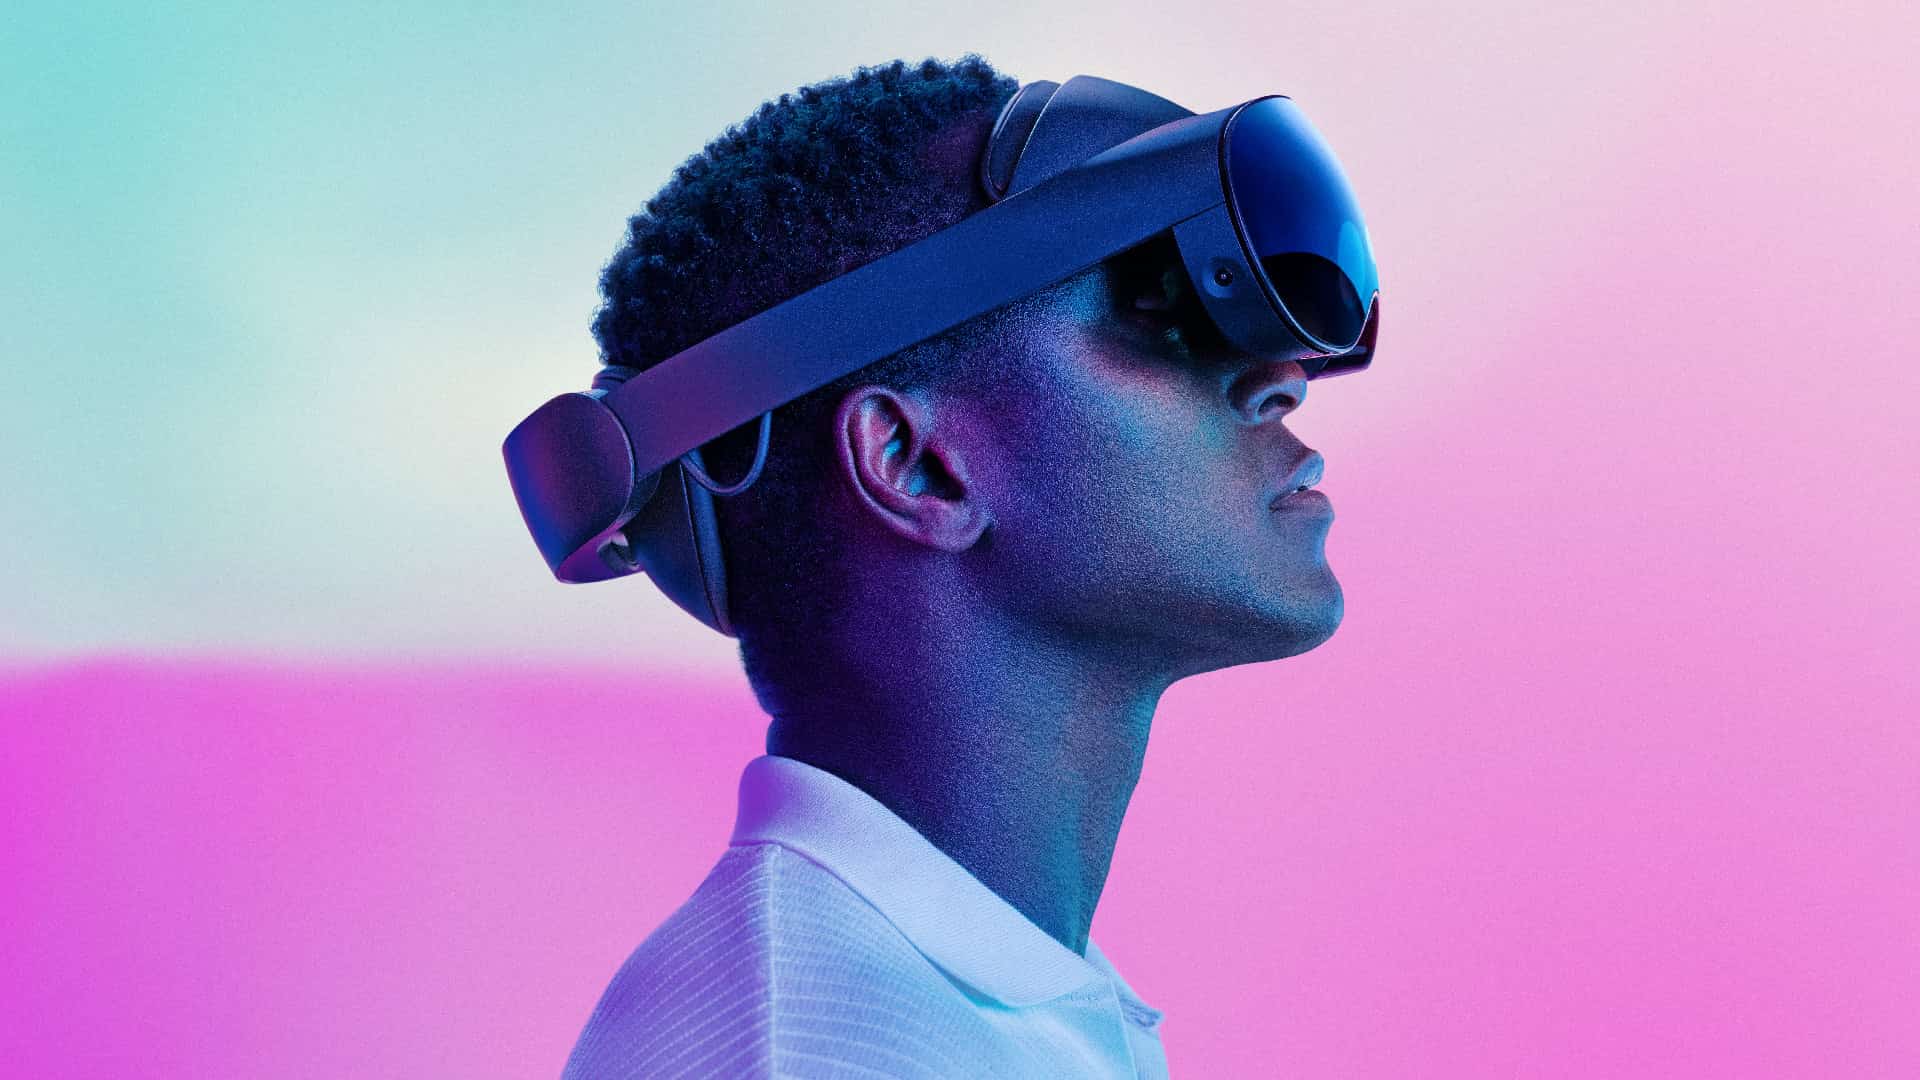 What’s Driving VR Market Growth?